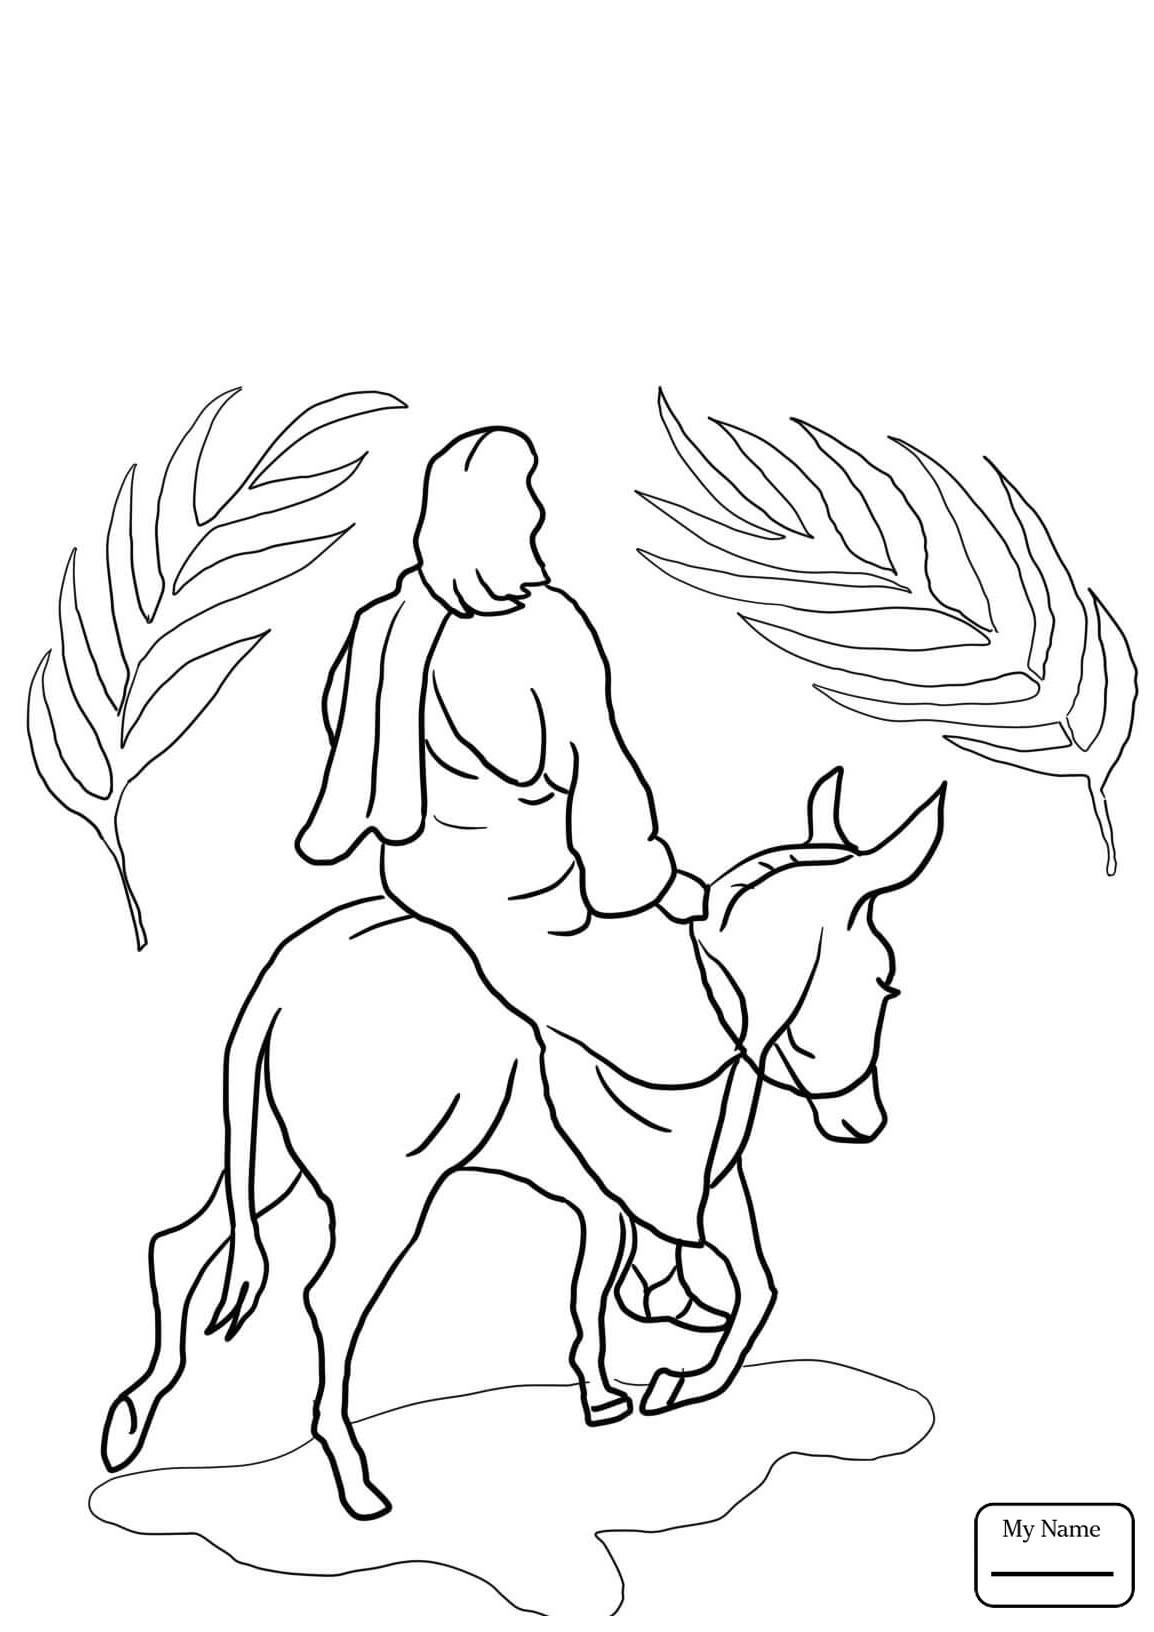 Palm Sunday Coloring Pages For Preschoolers at GetColorings com Free